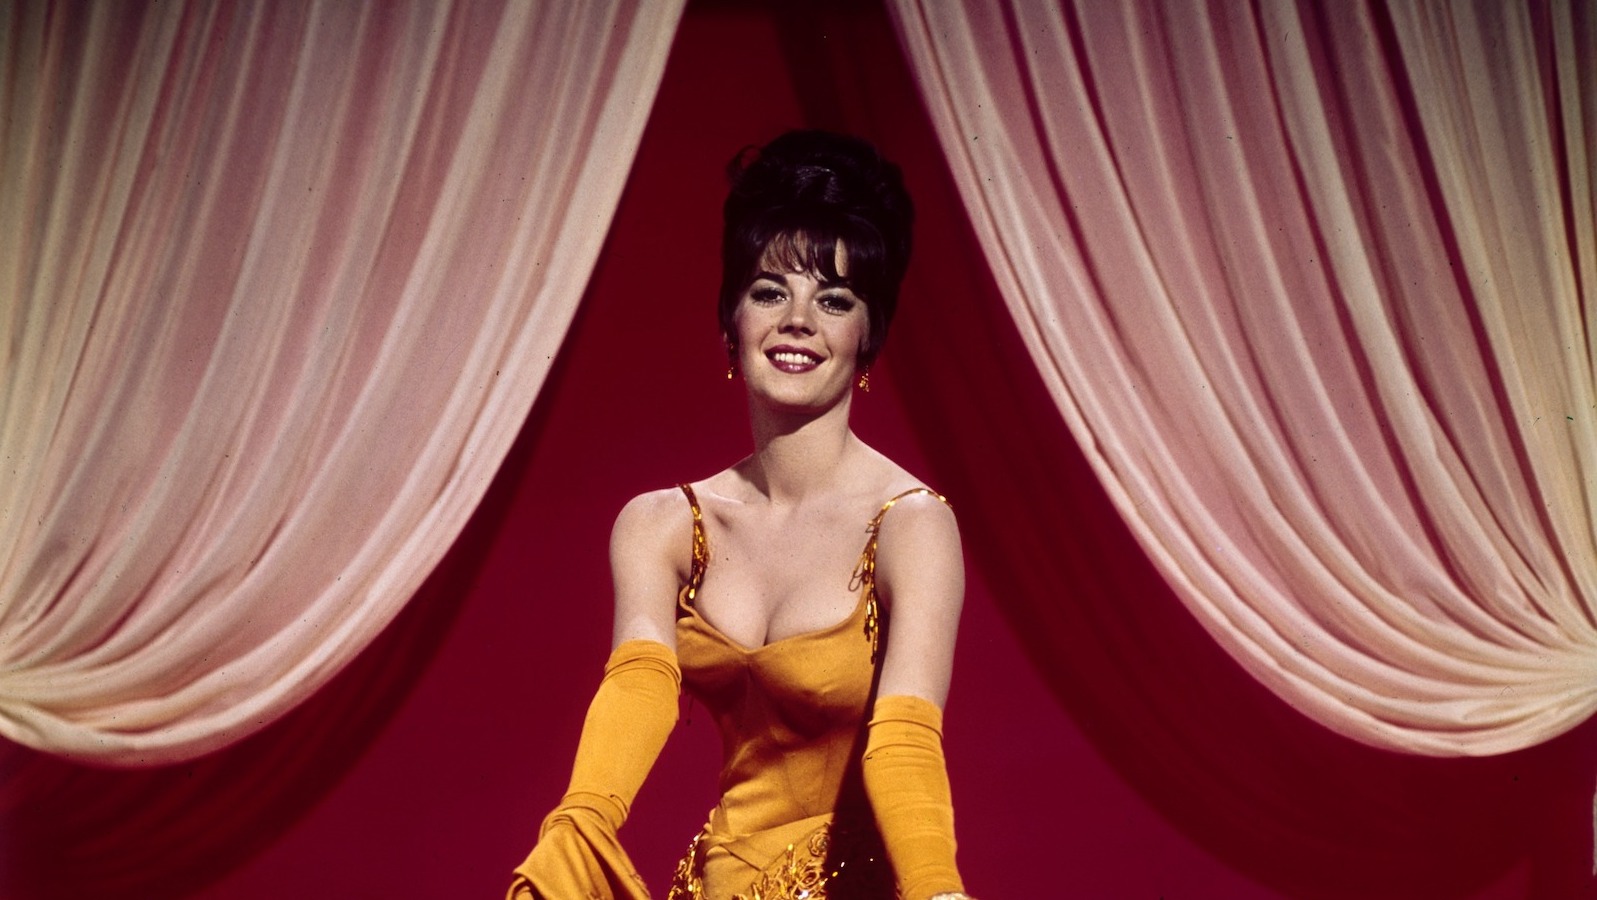 A burlesque performer in a low-cut yellow dress dances, facing the camera.